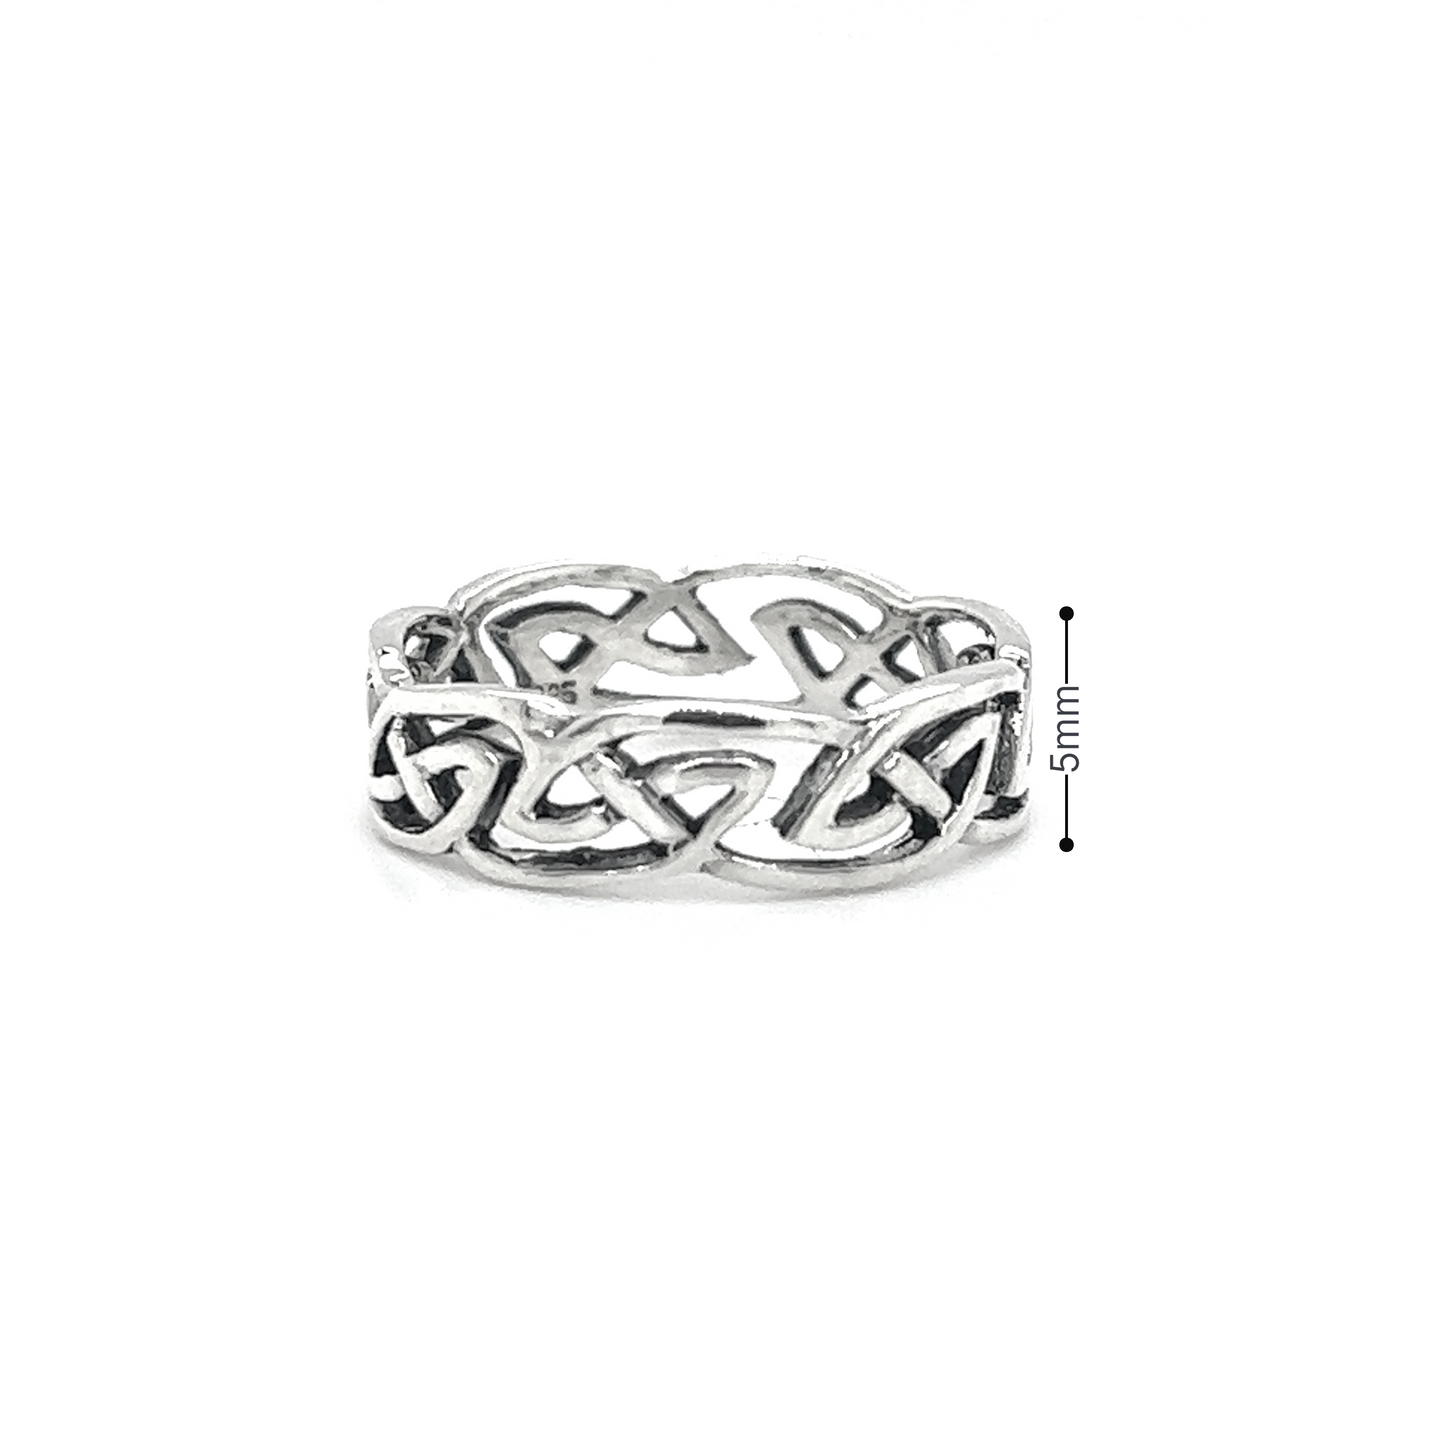 Wavy Celtic Band Ring with ancient intricacies, crafted in .925 Sterling Silver, by Super Silver.